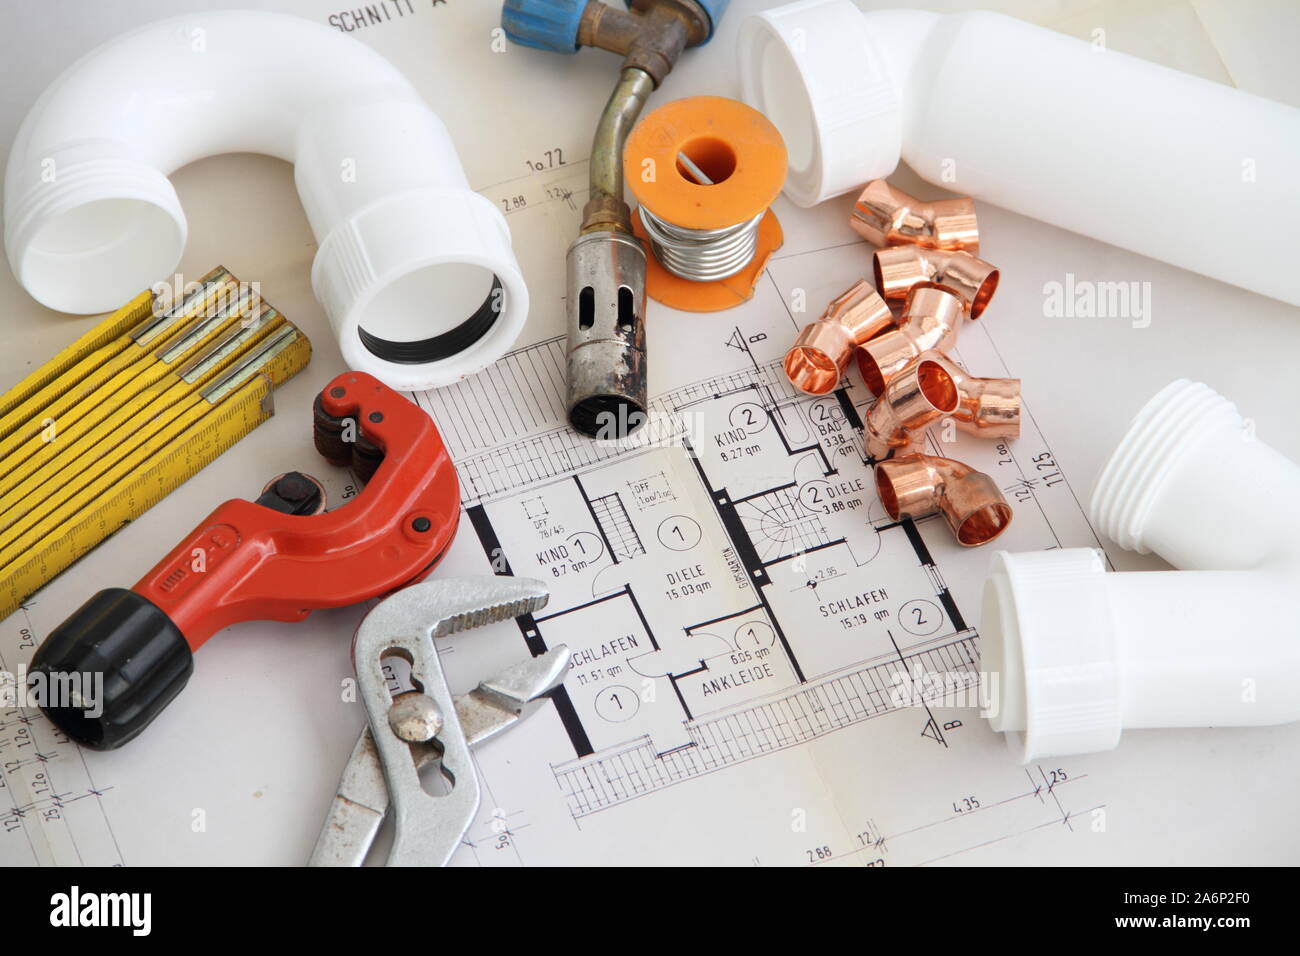 Installation material on a workbench Stock Photo